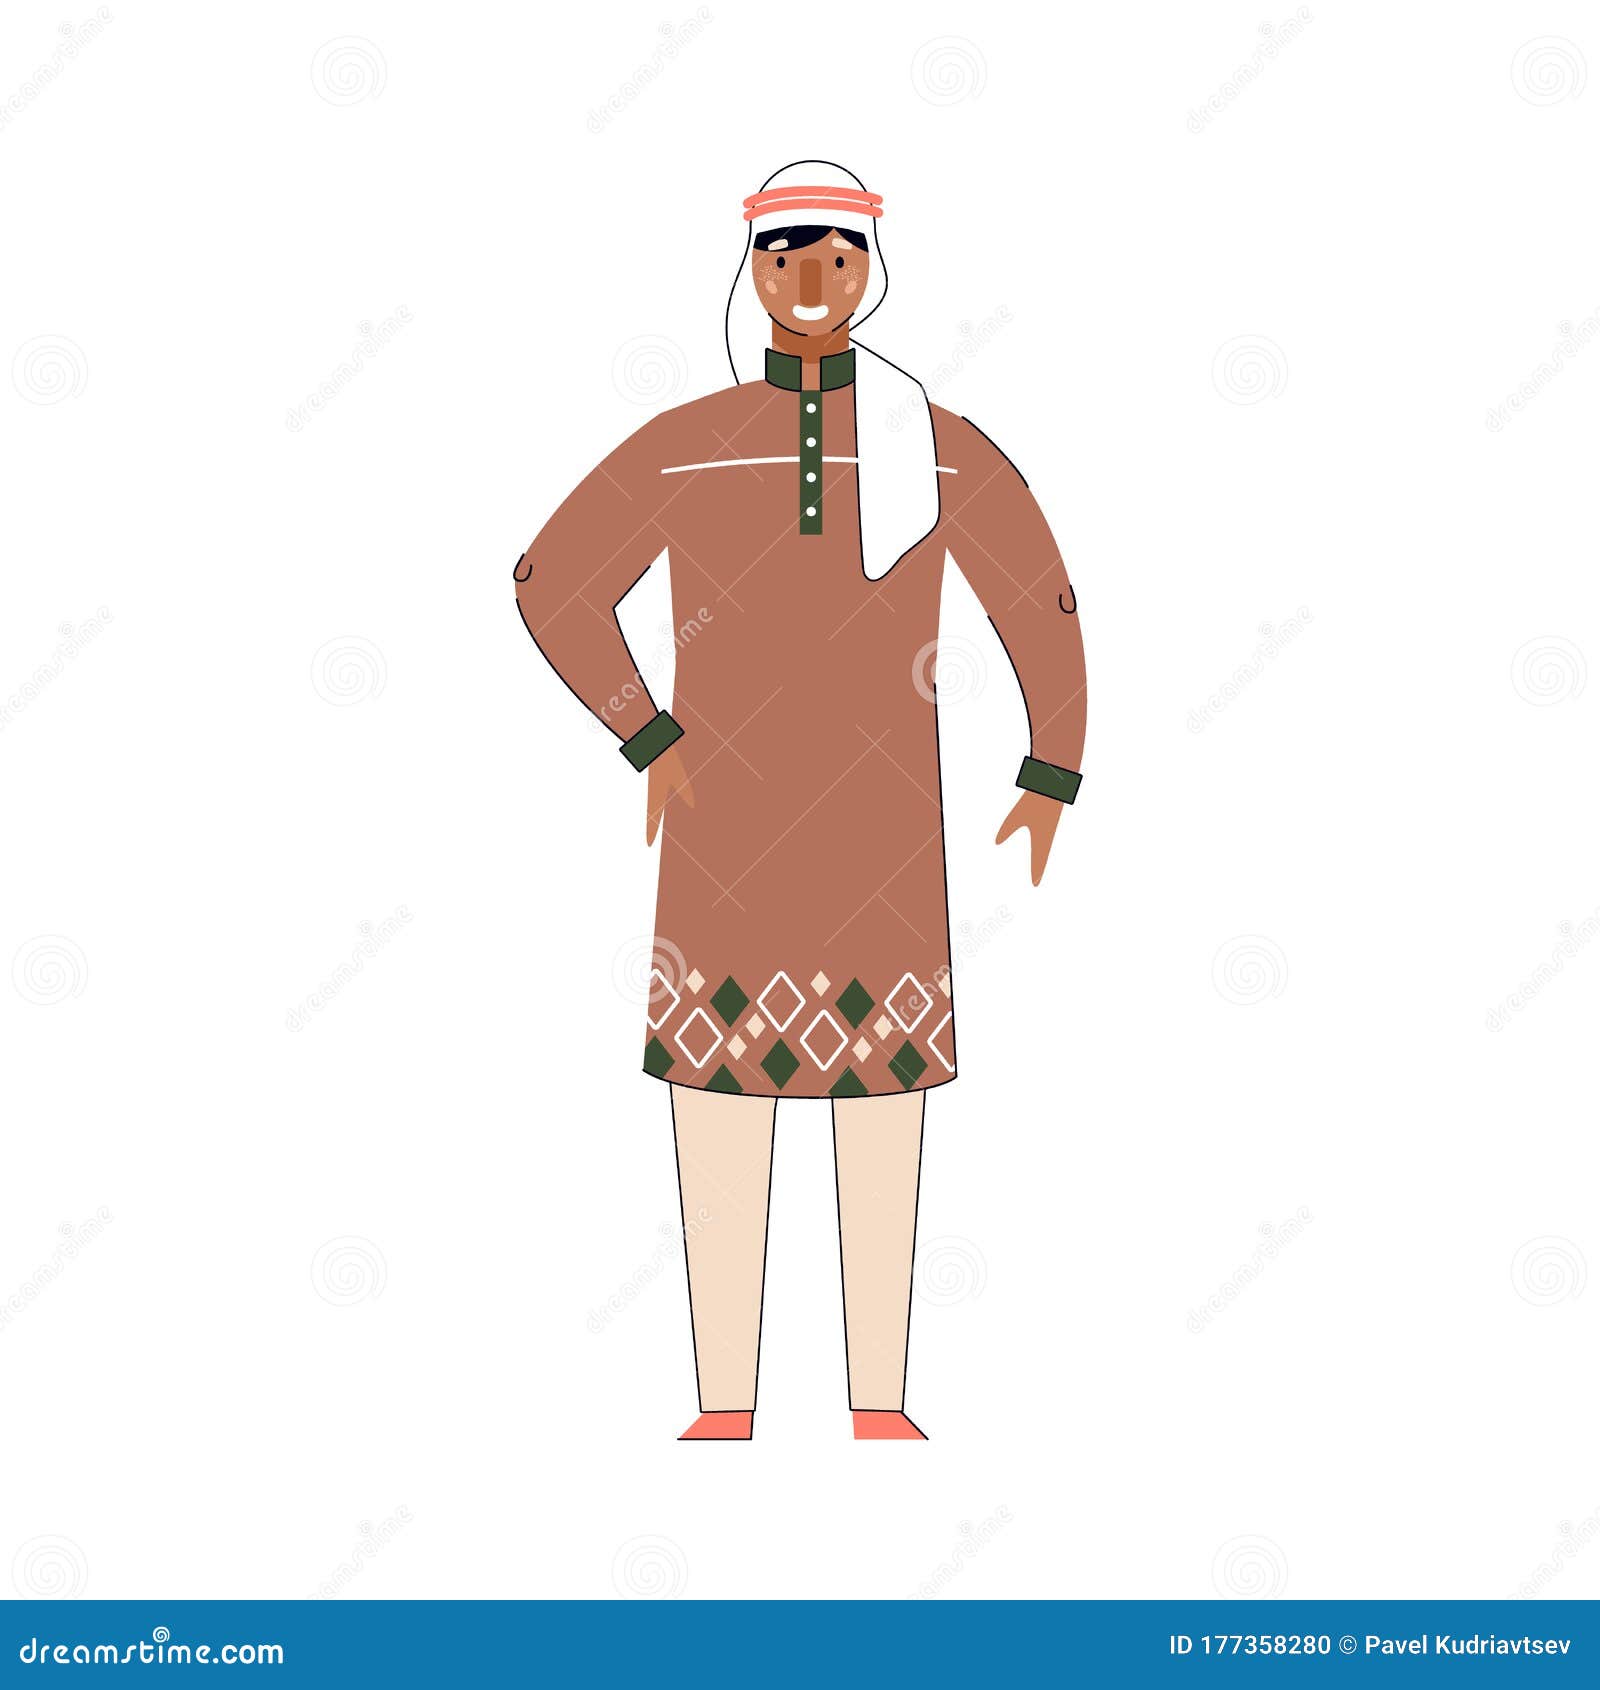 Male Arab Cartoon Character in Traditional Arabic Headscarf and Thobe.  Stock Vector - Illustration of gesture, smiling: 177358280